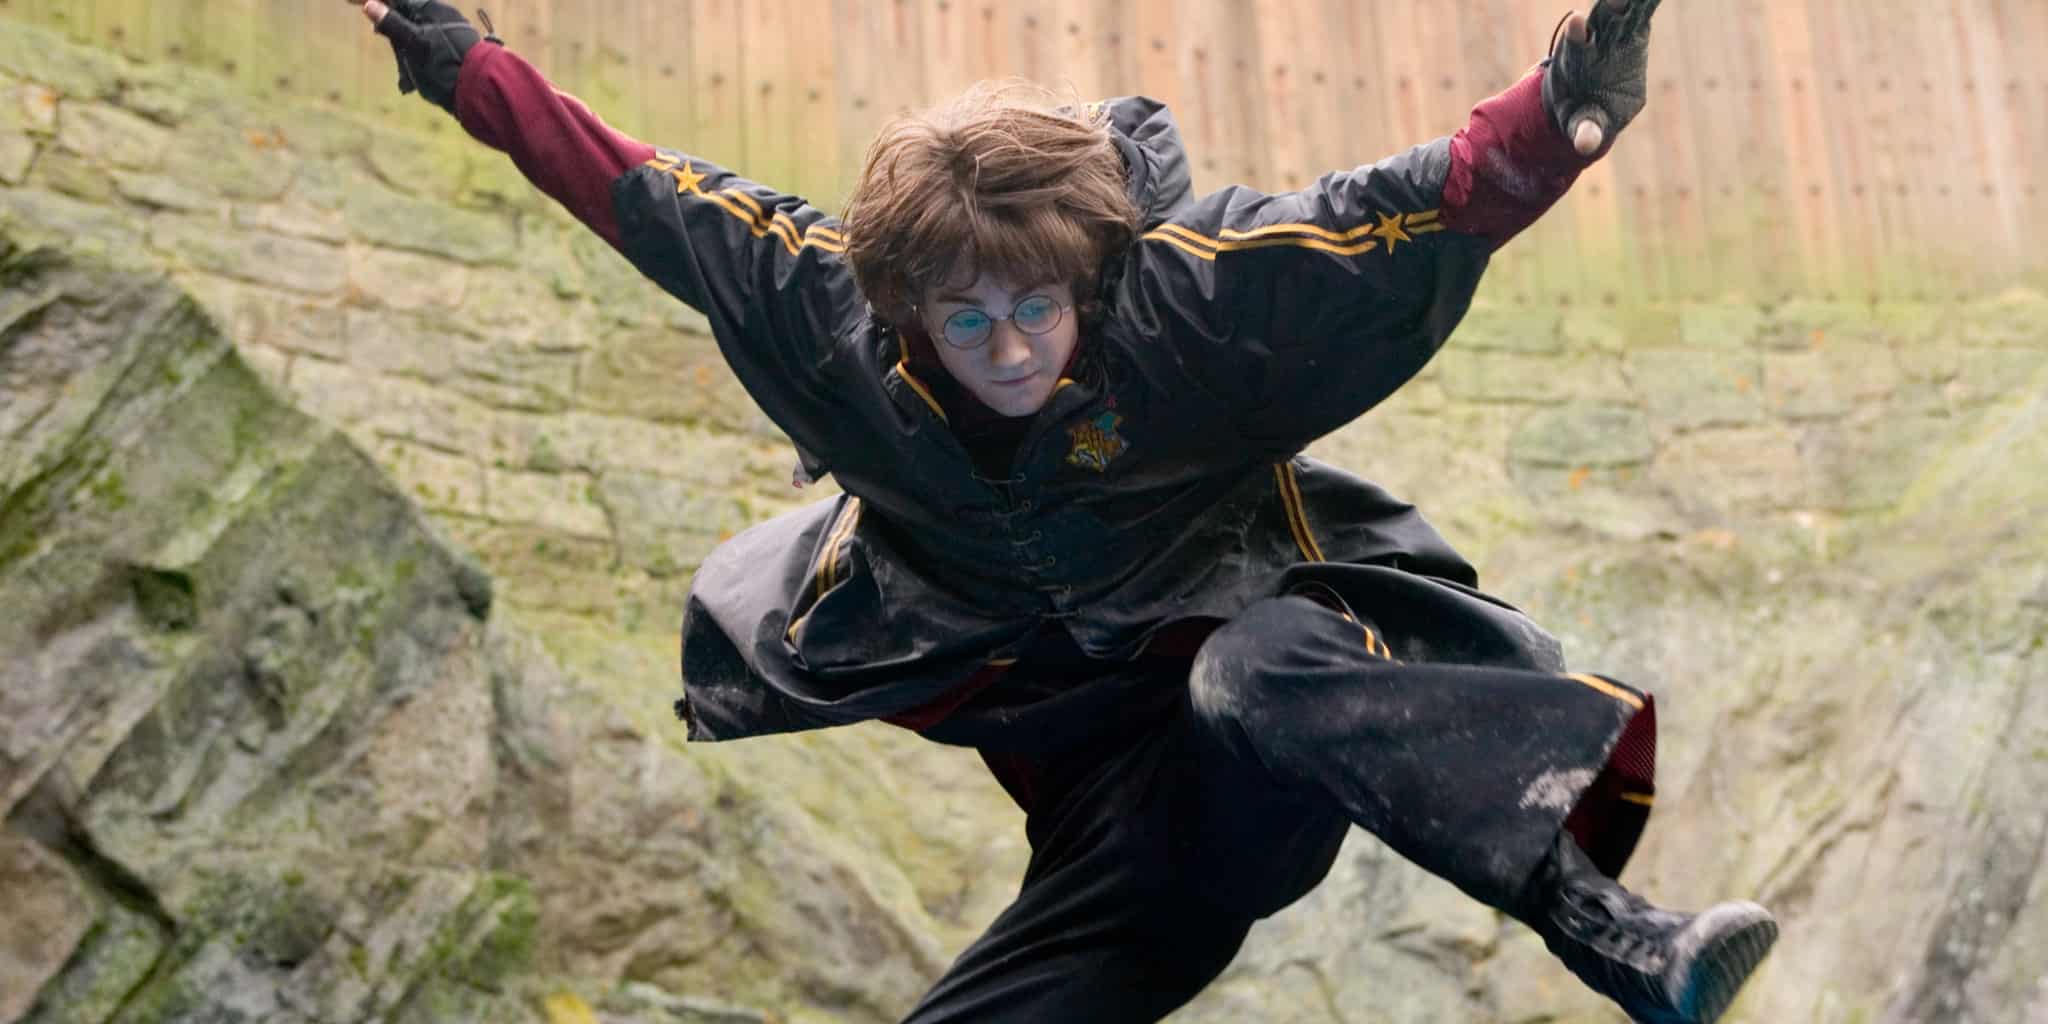 Daniel Radcliffe in this image from Warner Bros. Pictures